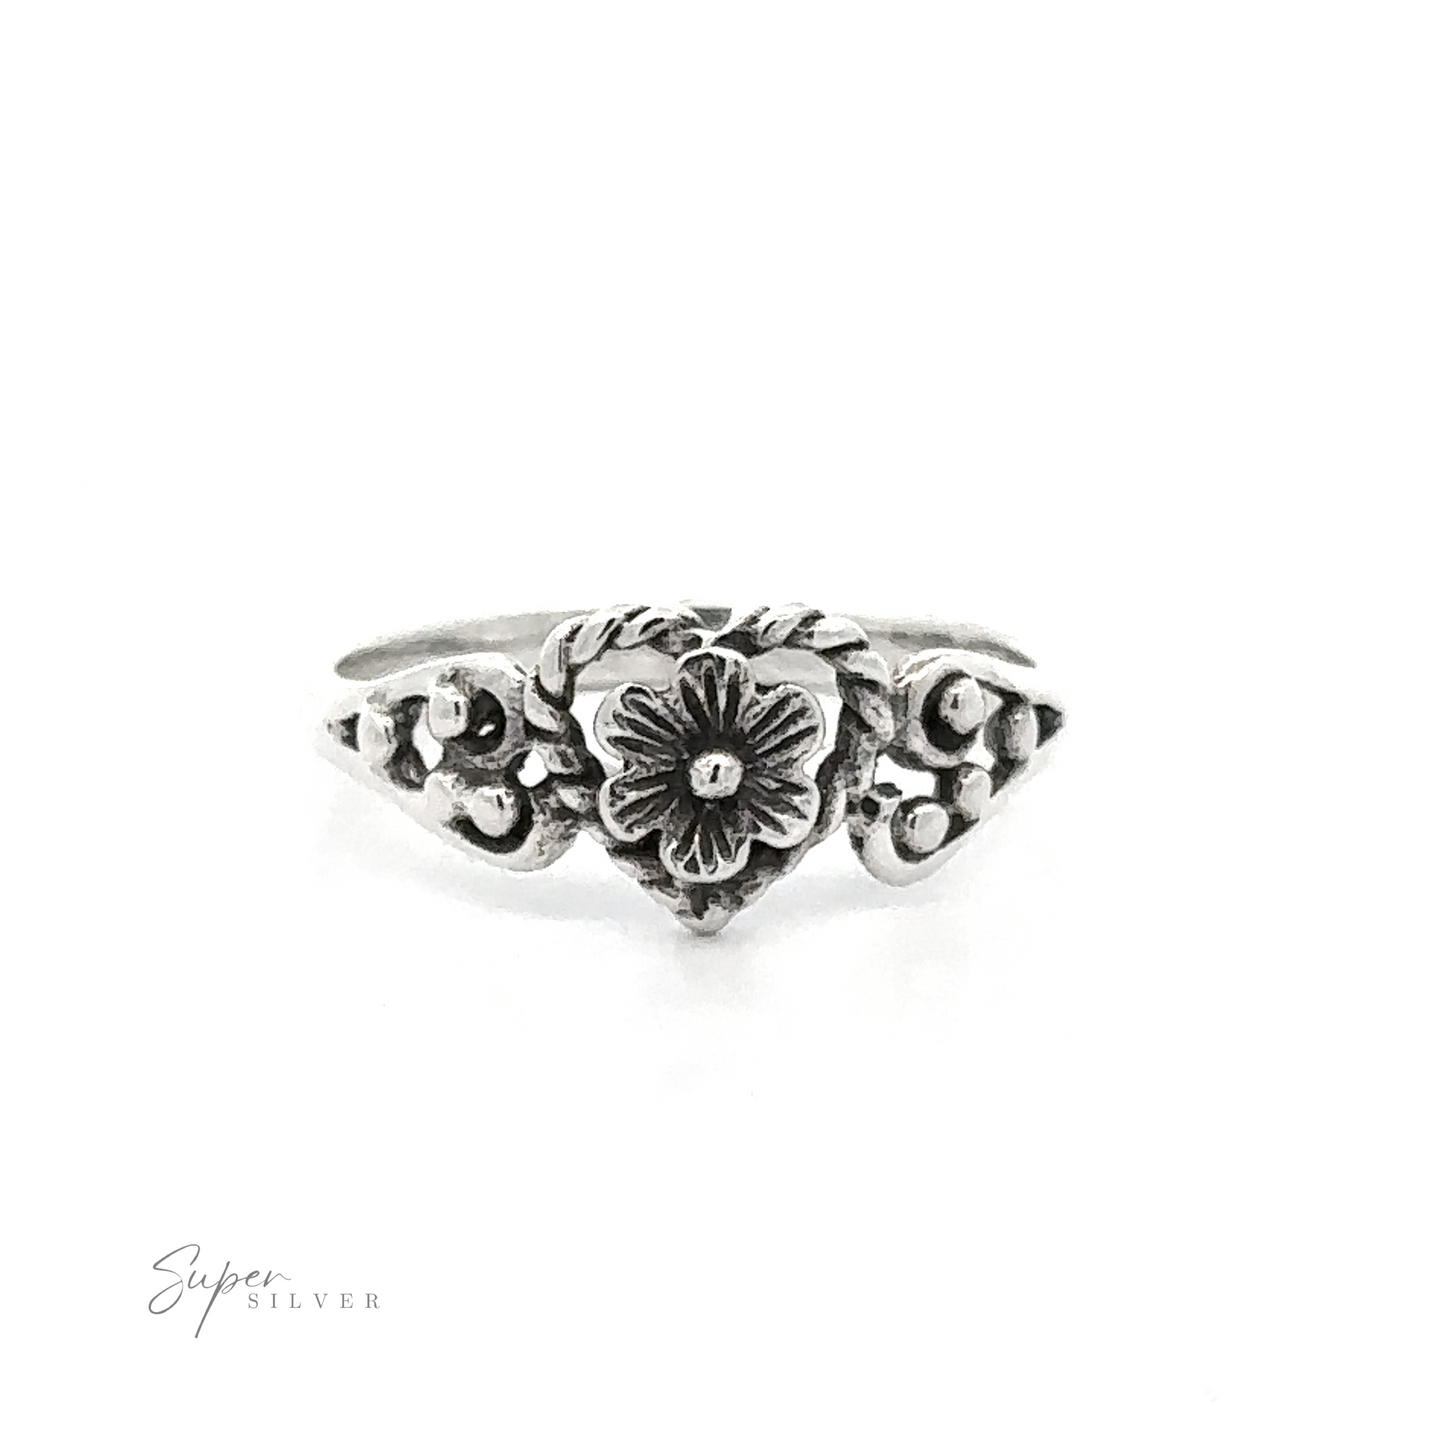 
                  
                    Twisted Heart Outline Ring with Floral Detailing featuring a flower design, positioned centrally on a white background with "super silver" signature visible at the bottom.
                  
                